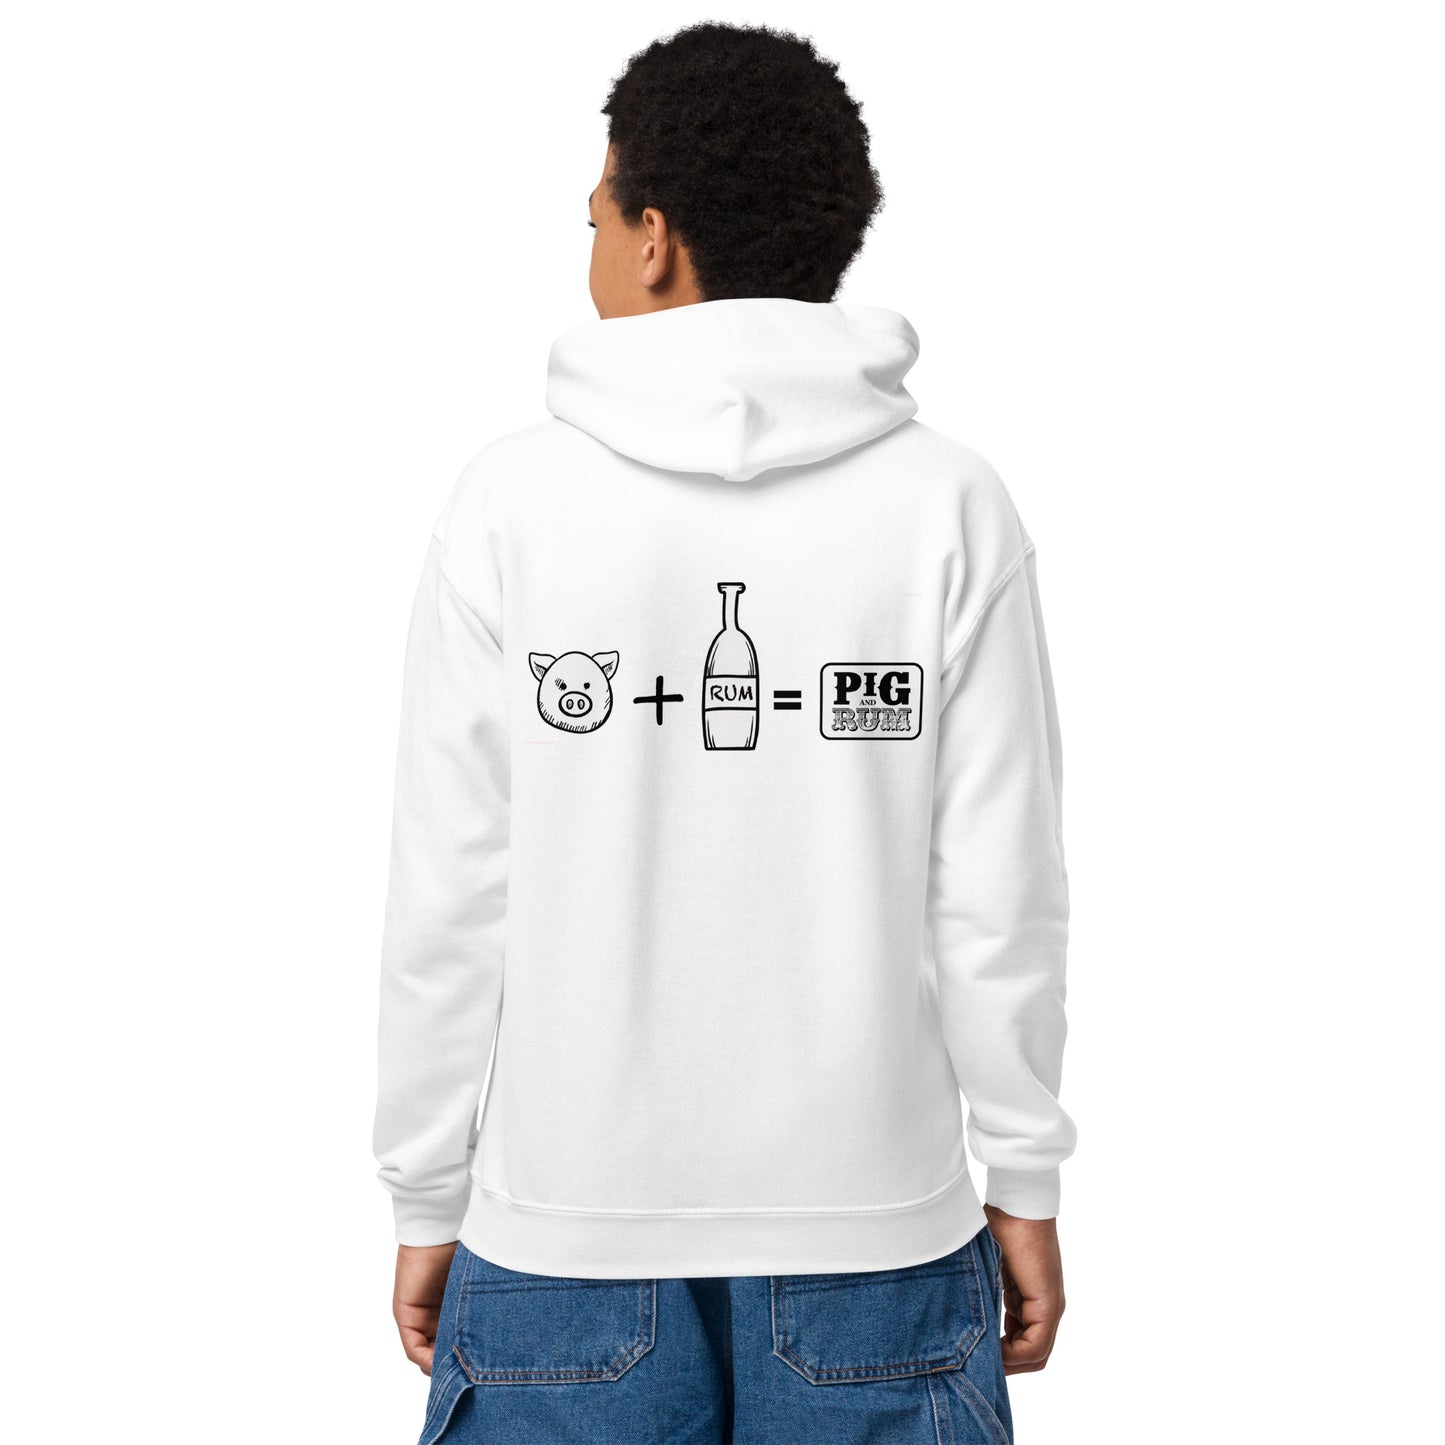 bar family United Youth heavy blend hoodie